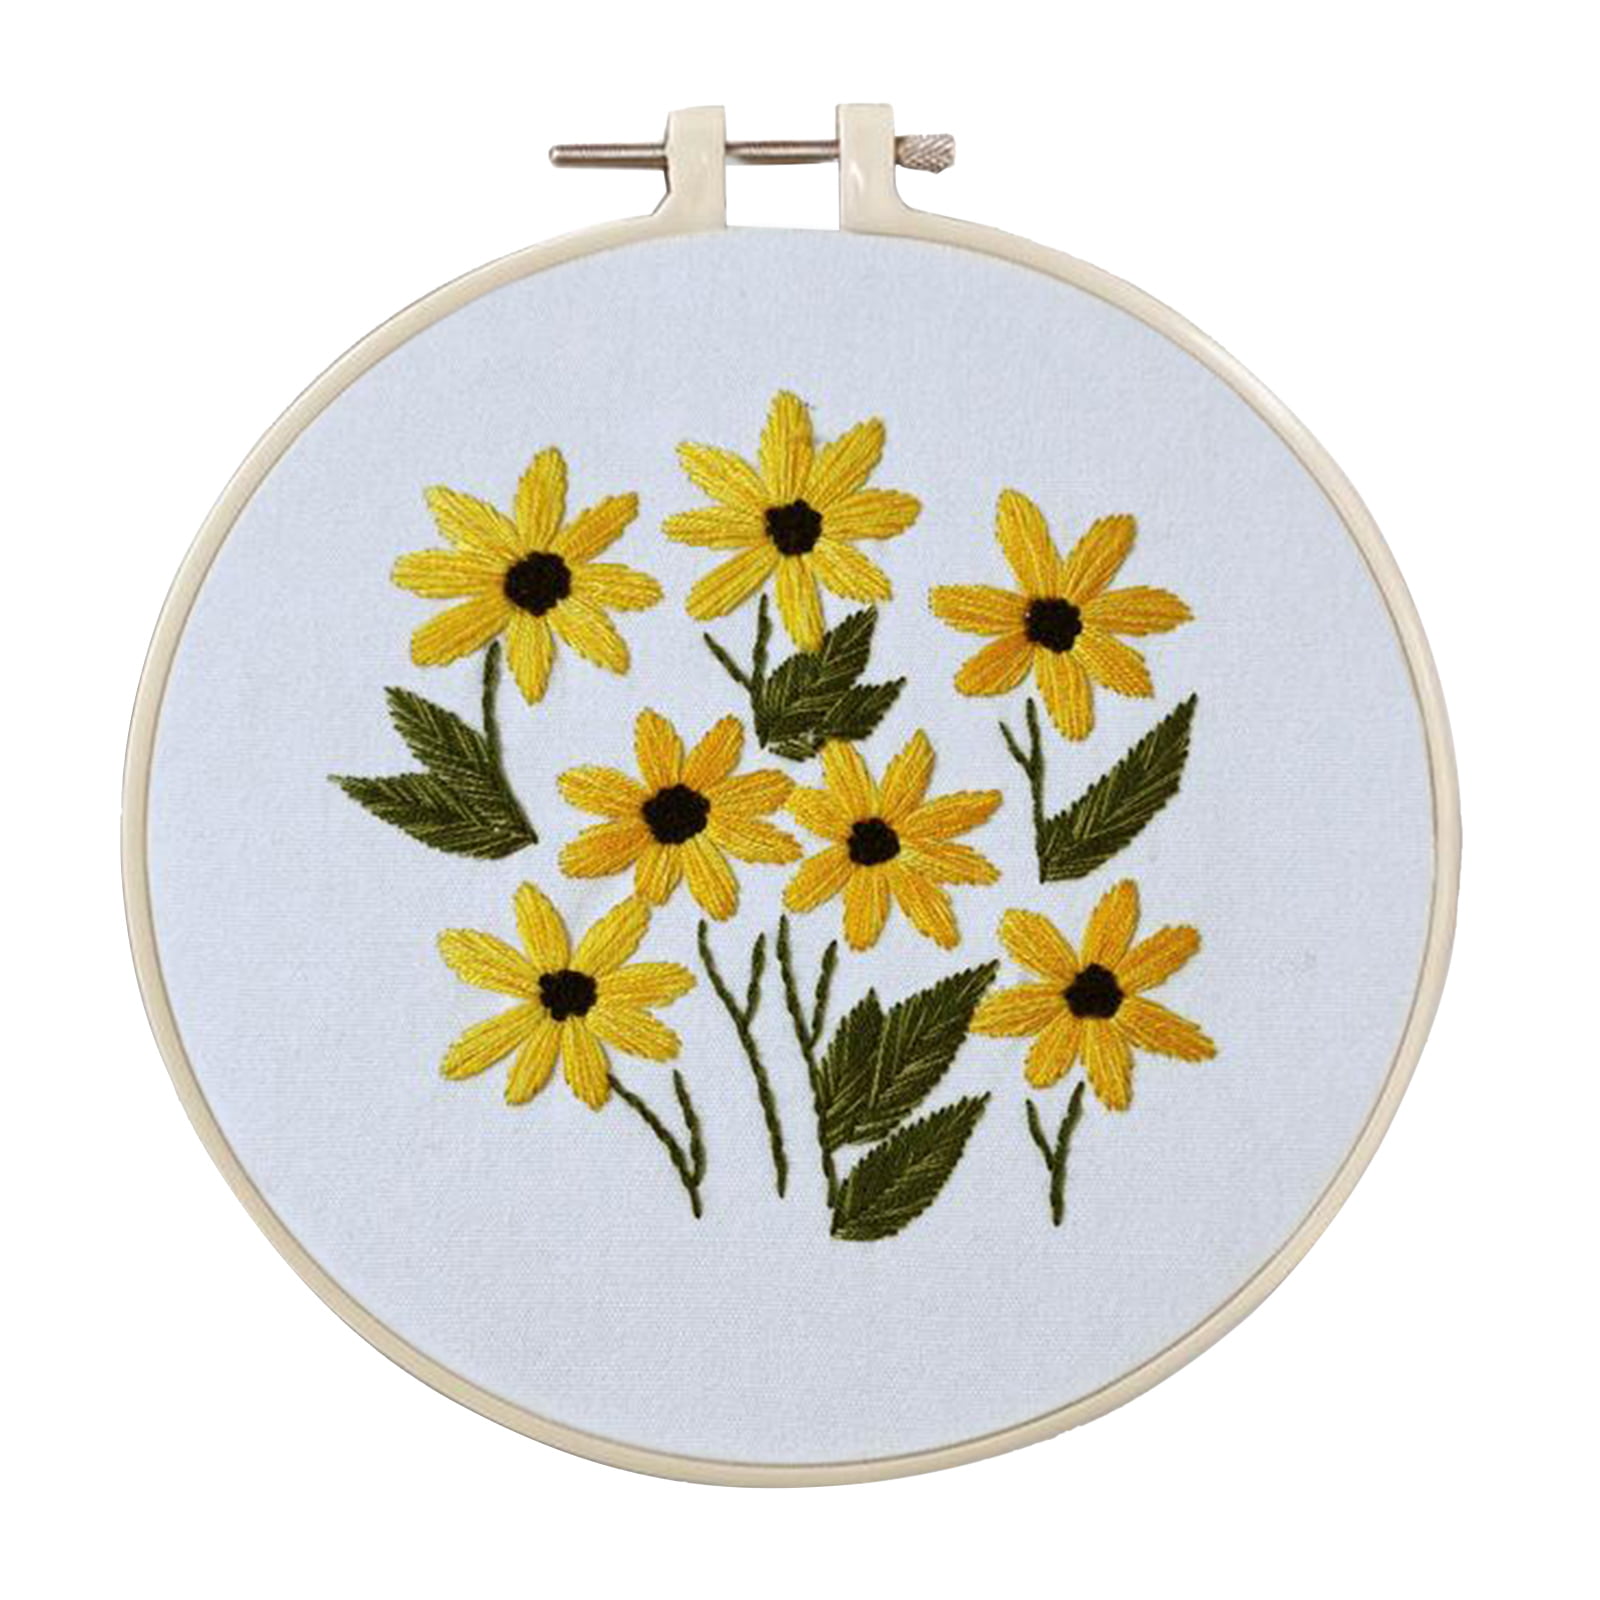 Clothes with Stamped Pattern Embroidery Hoop and Color Threads Tools Yellow Embroidery Kit for Beginners Cross Stitch Kit for Starter Adults Needlepoint Kits Full Range of Embroidery Kits 